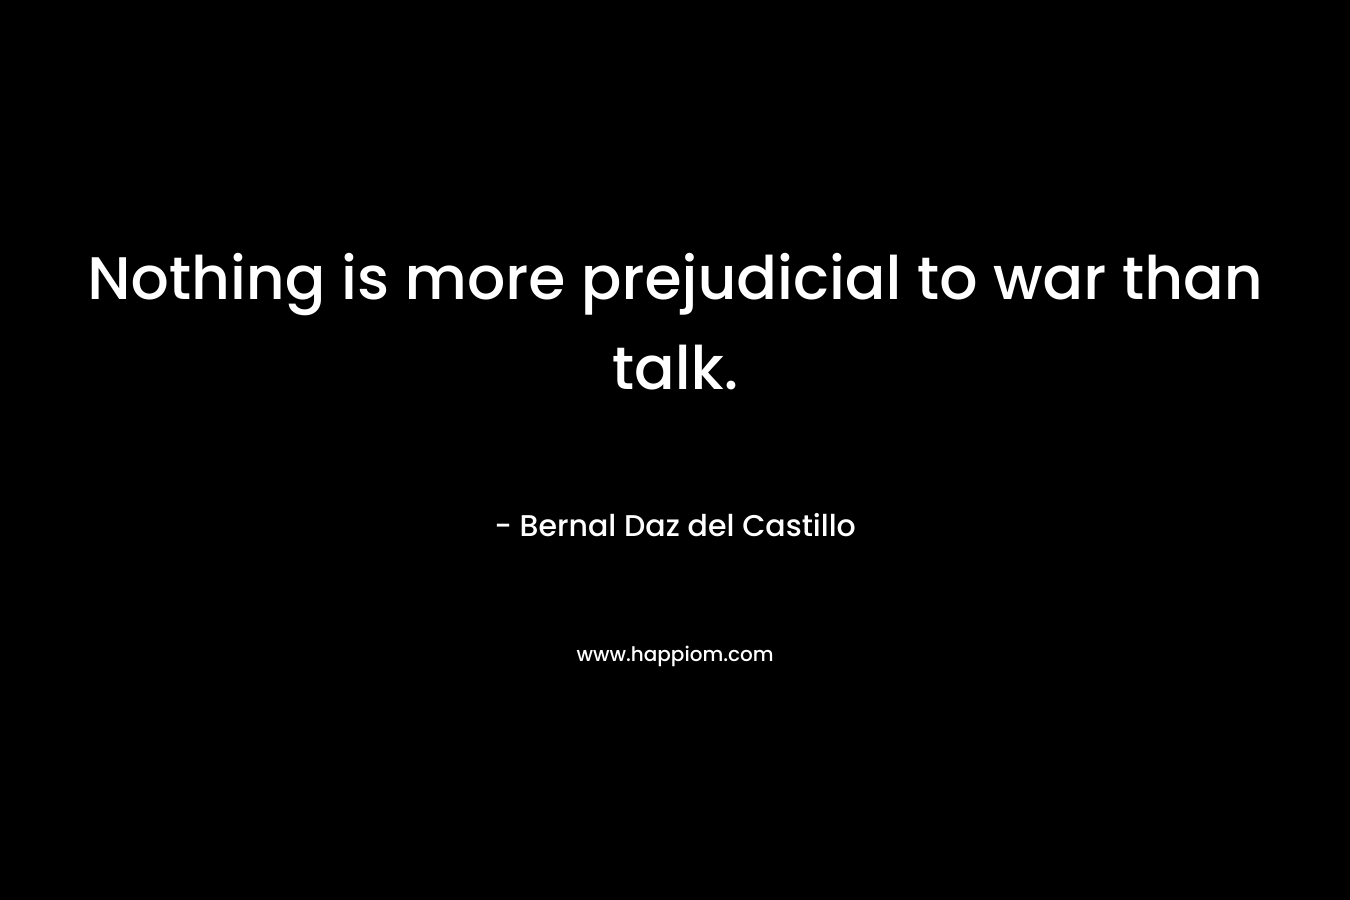 Nothing is more prejudicial to war than talk.